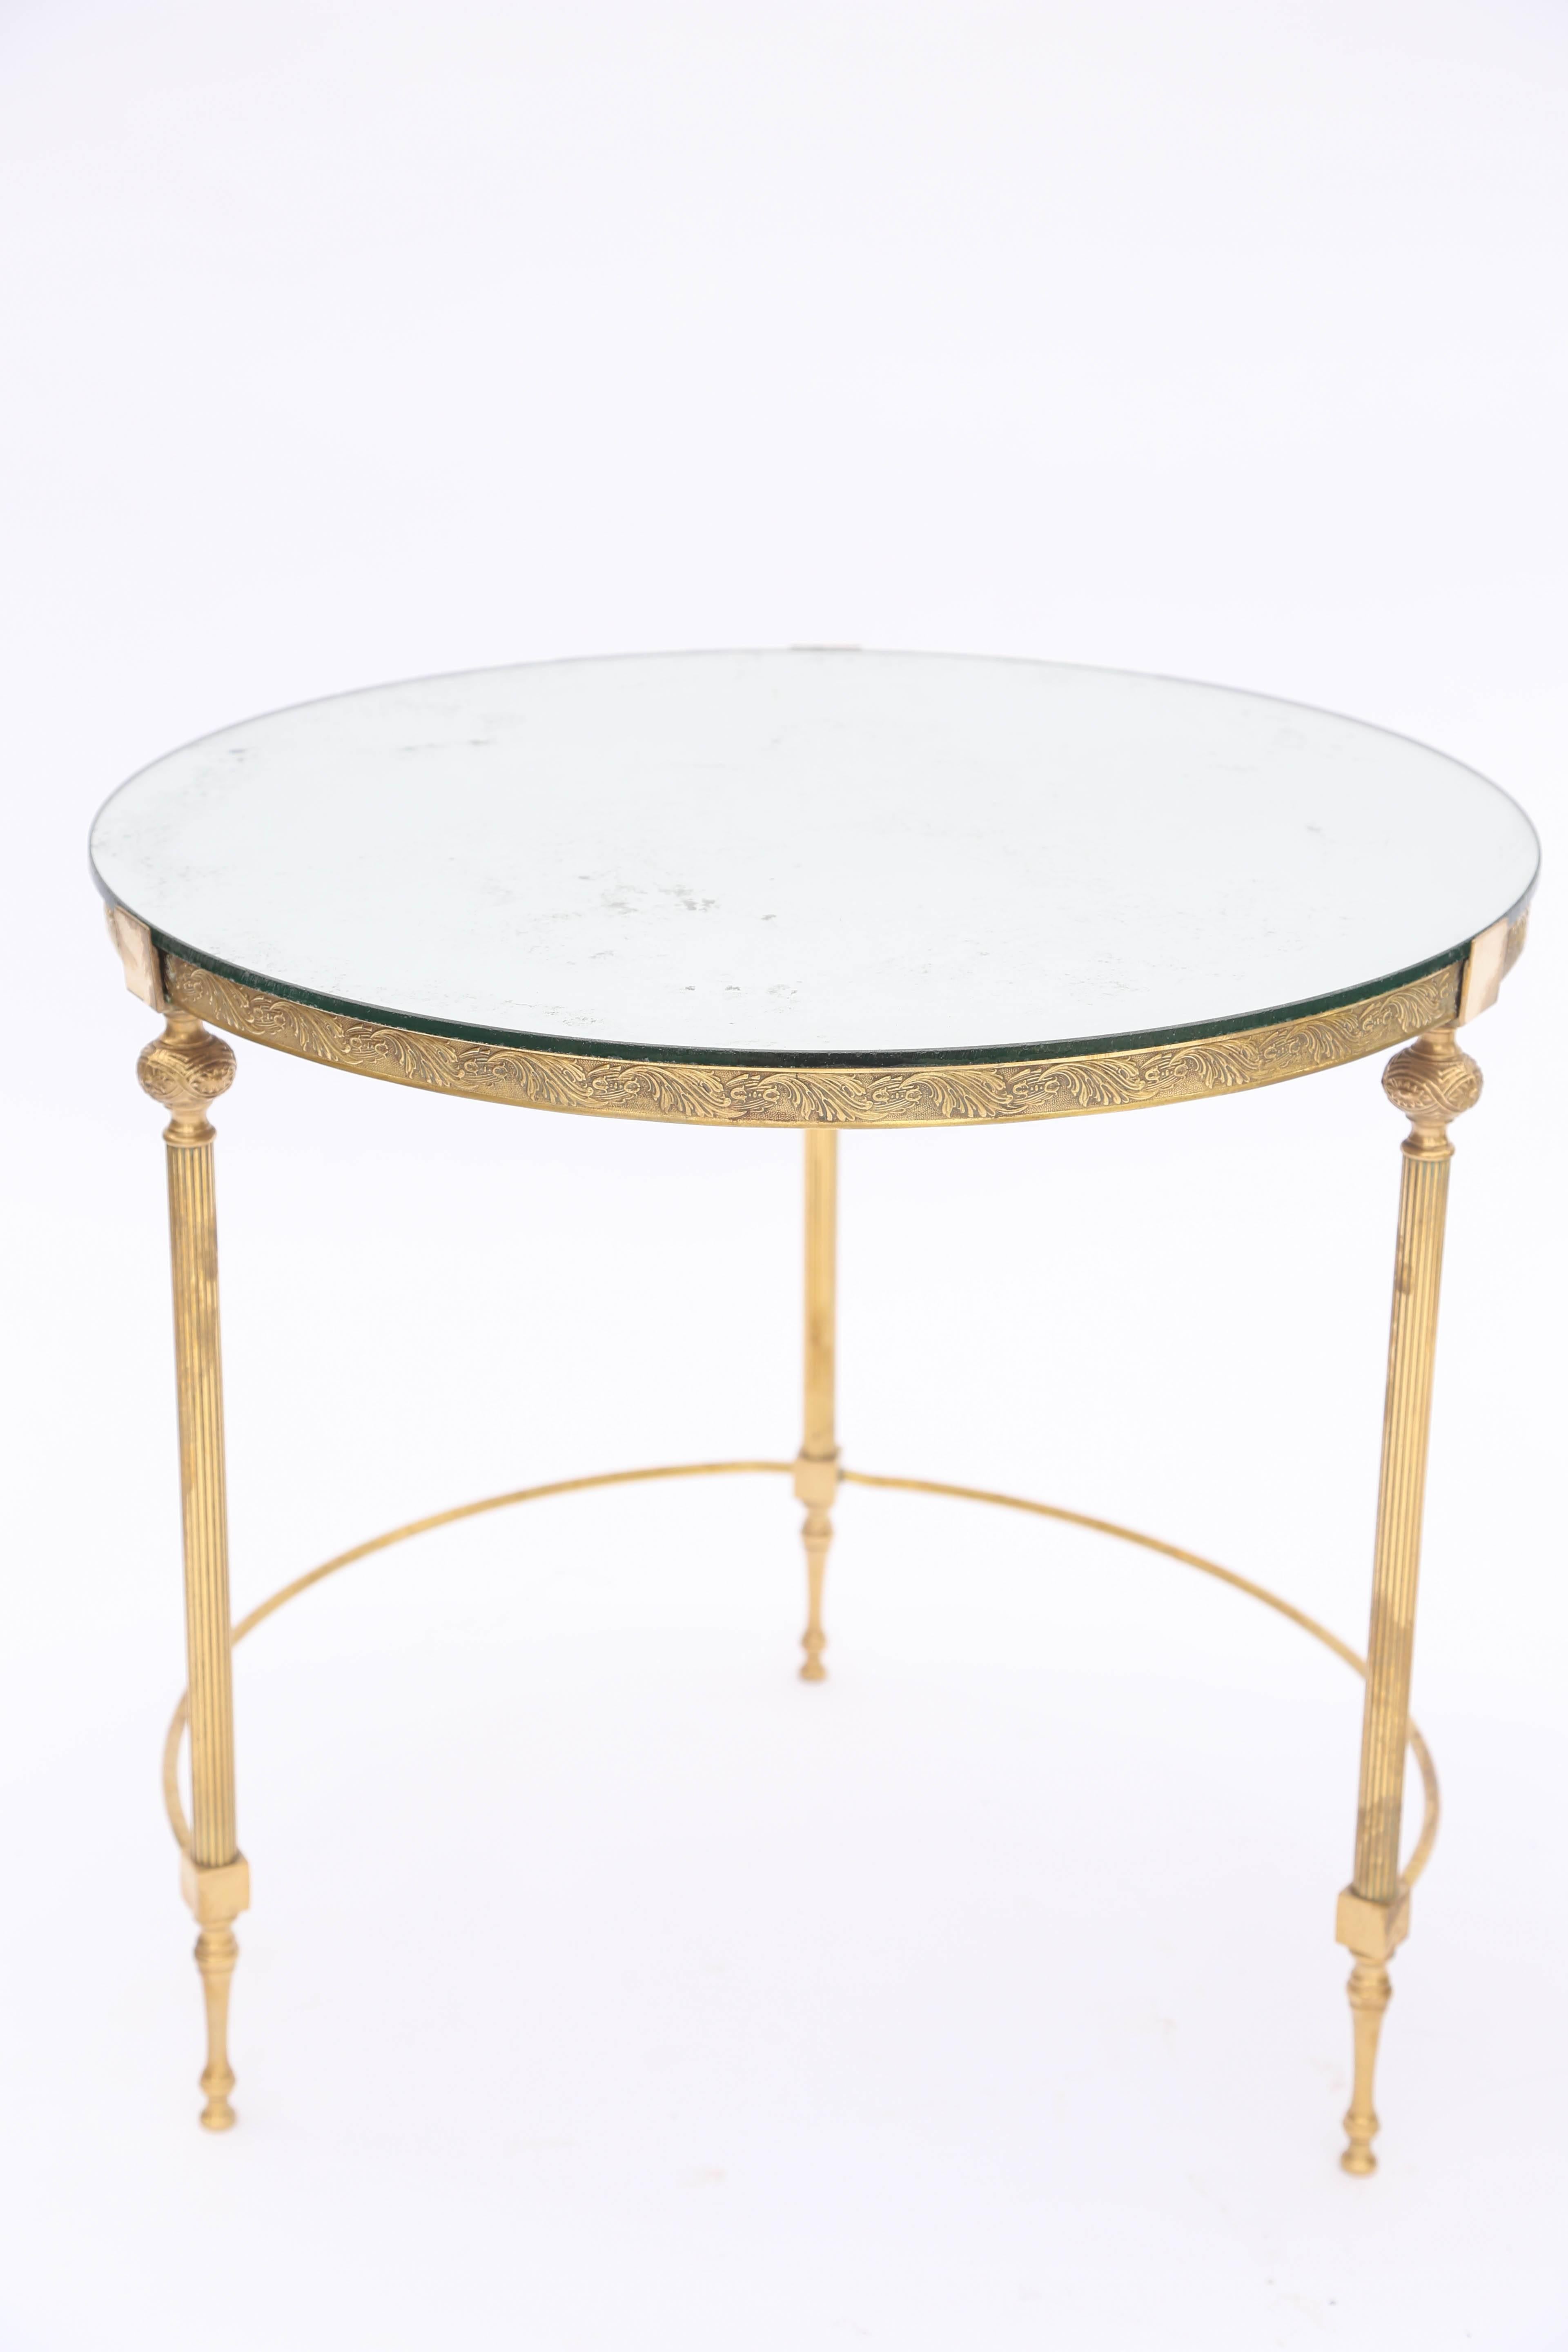 Italian Set of Three Round Nesting Tables with Mirrored Tops